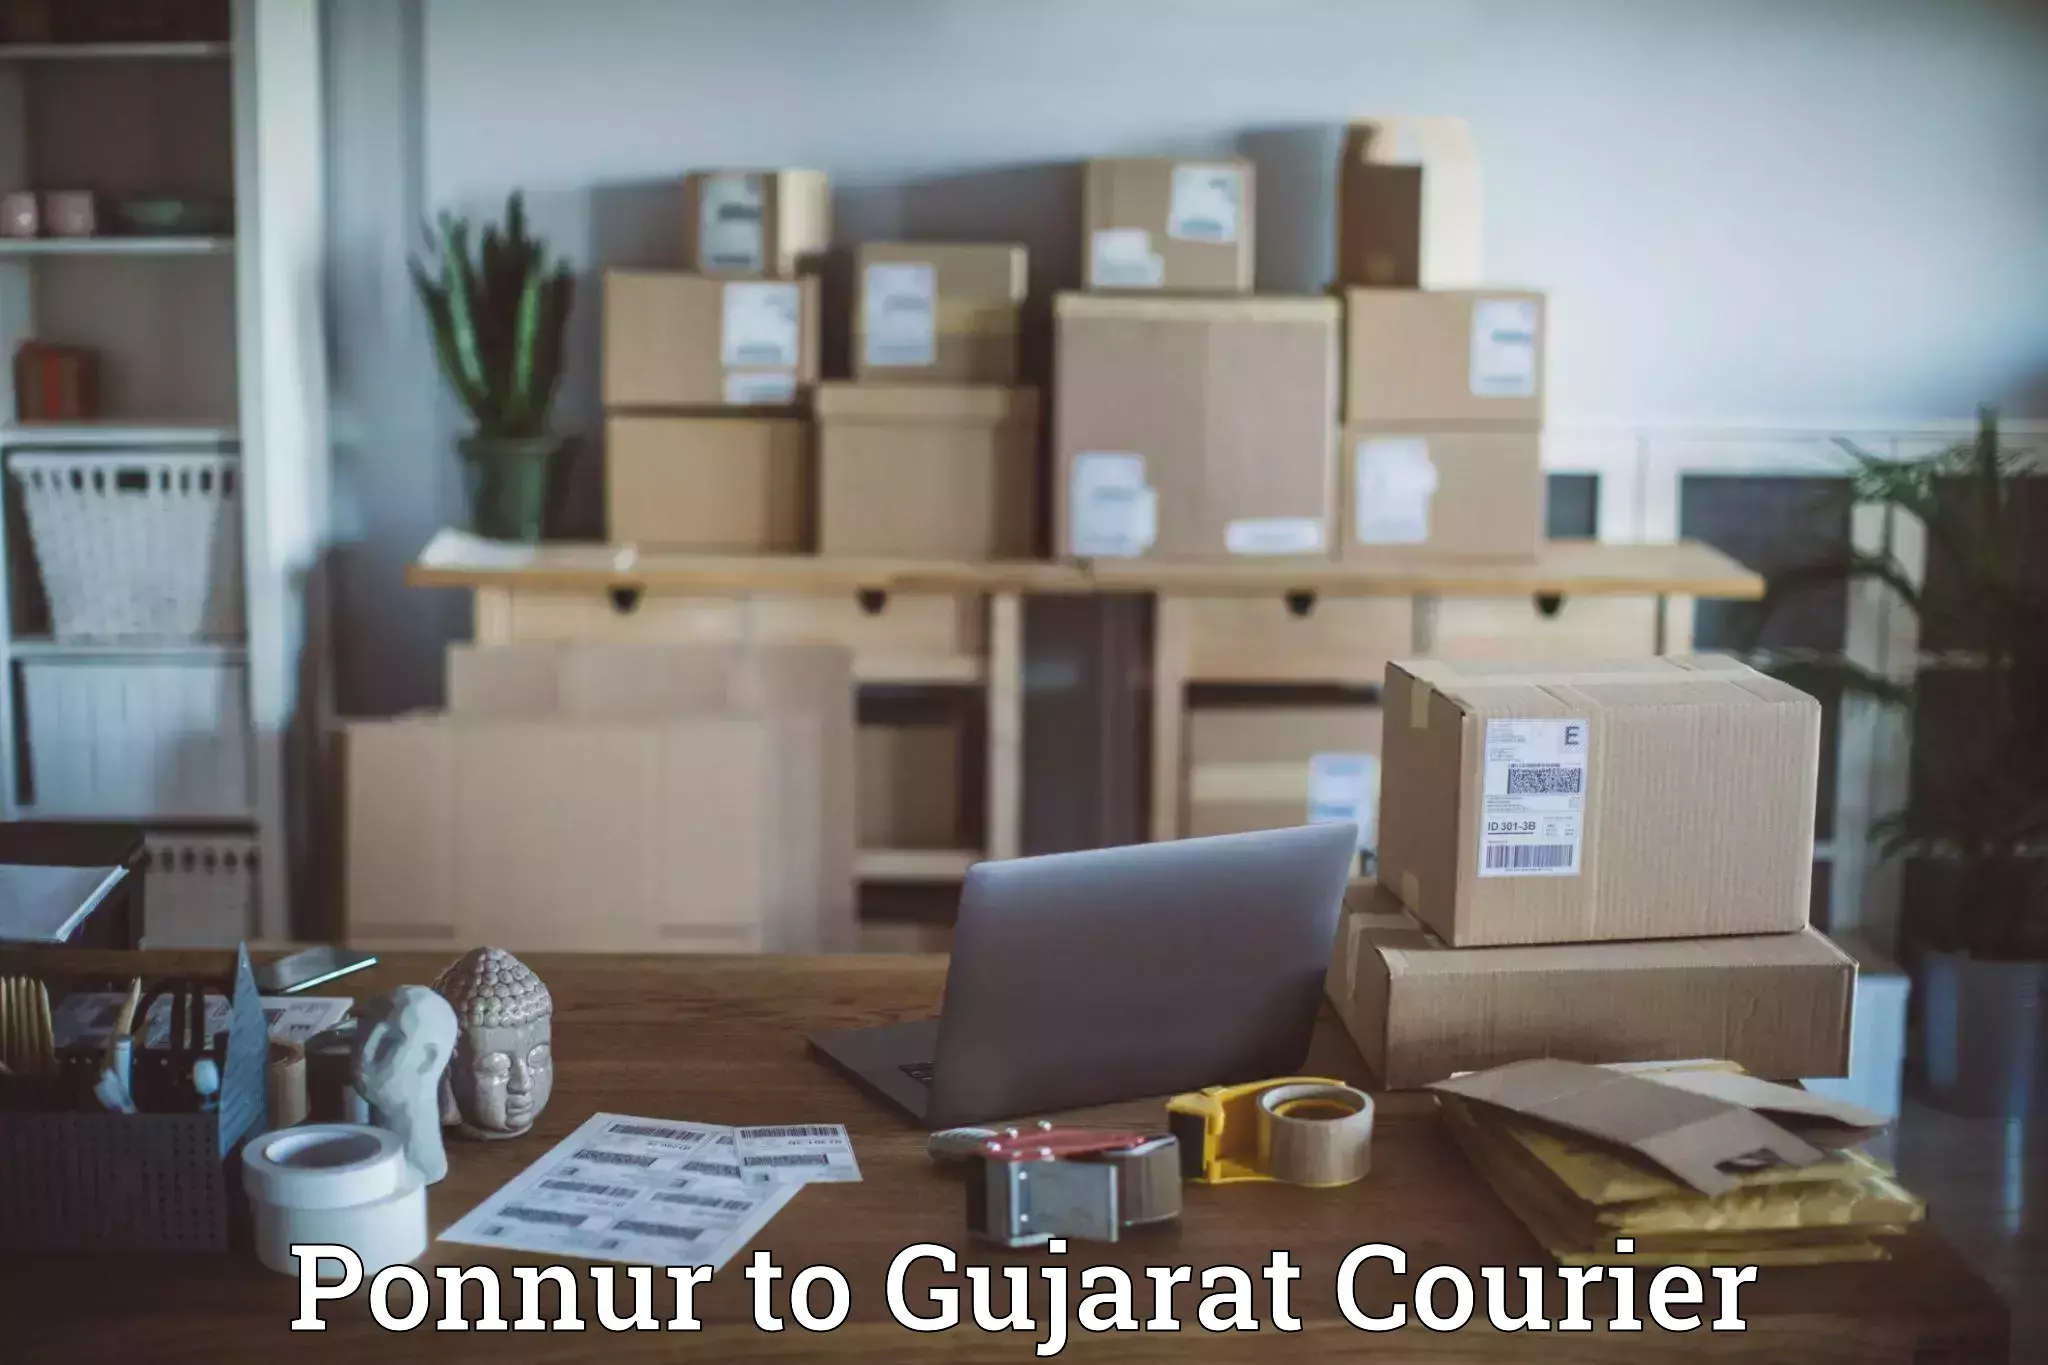 On-demand courier Ponnur to Ahmedabad